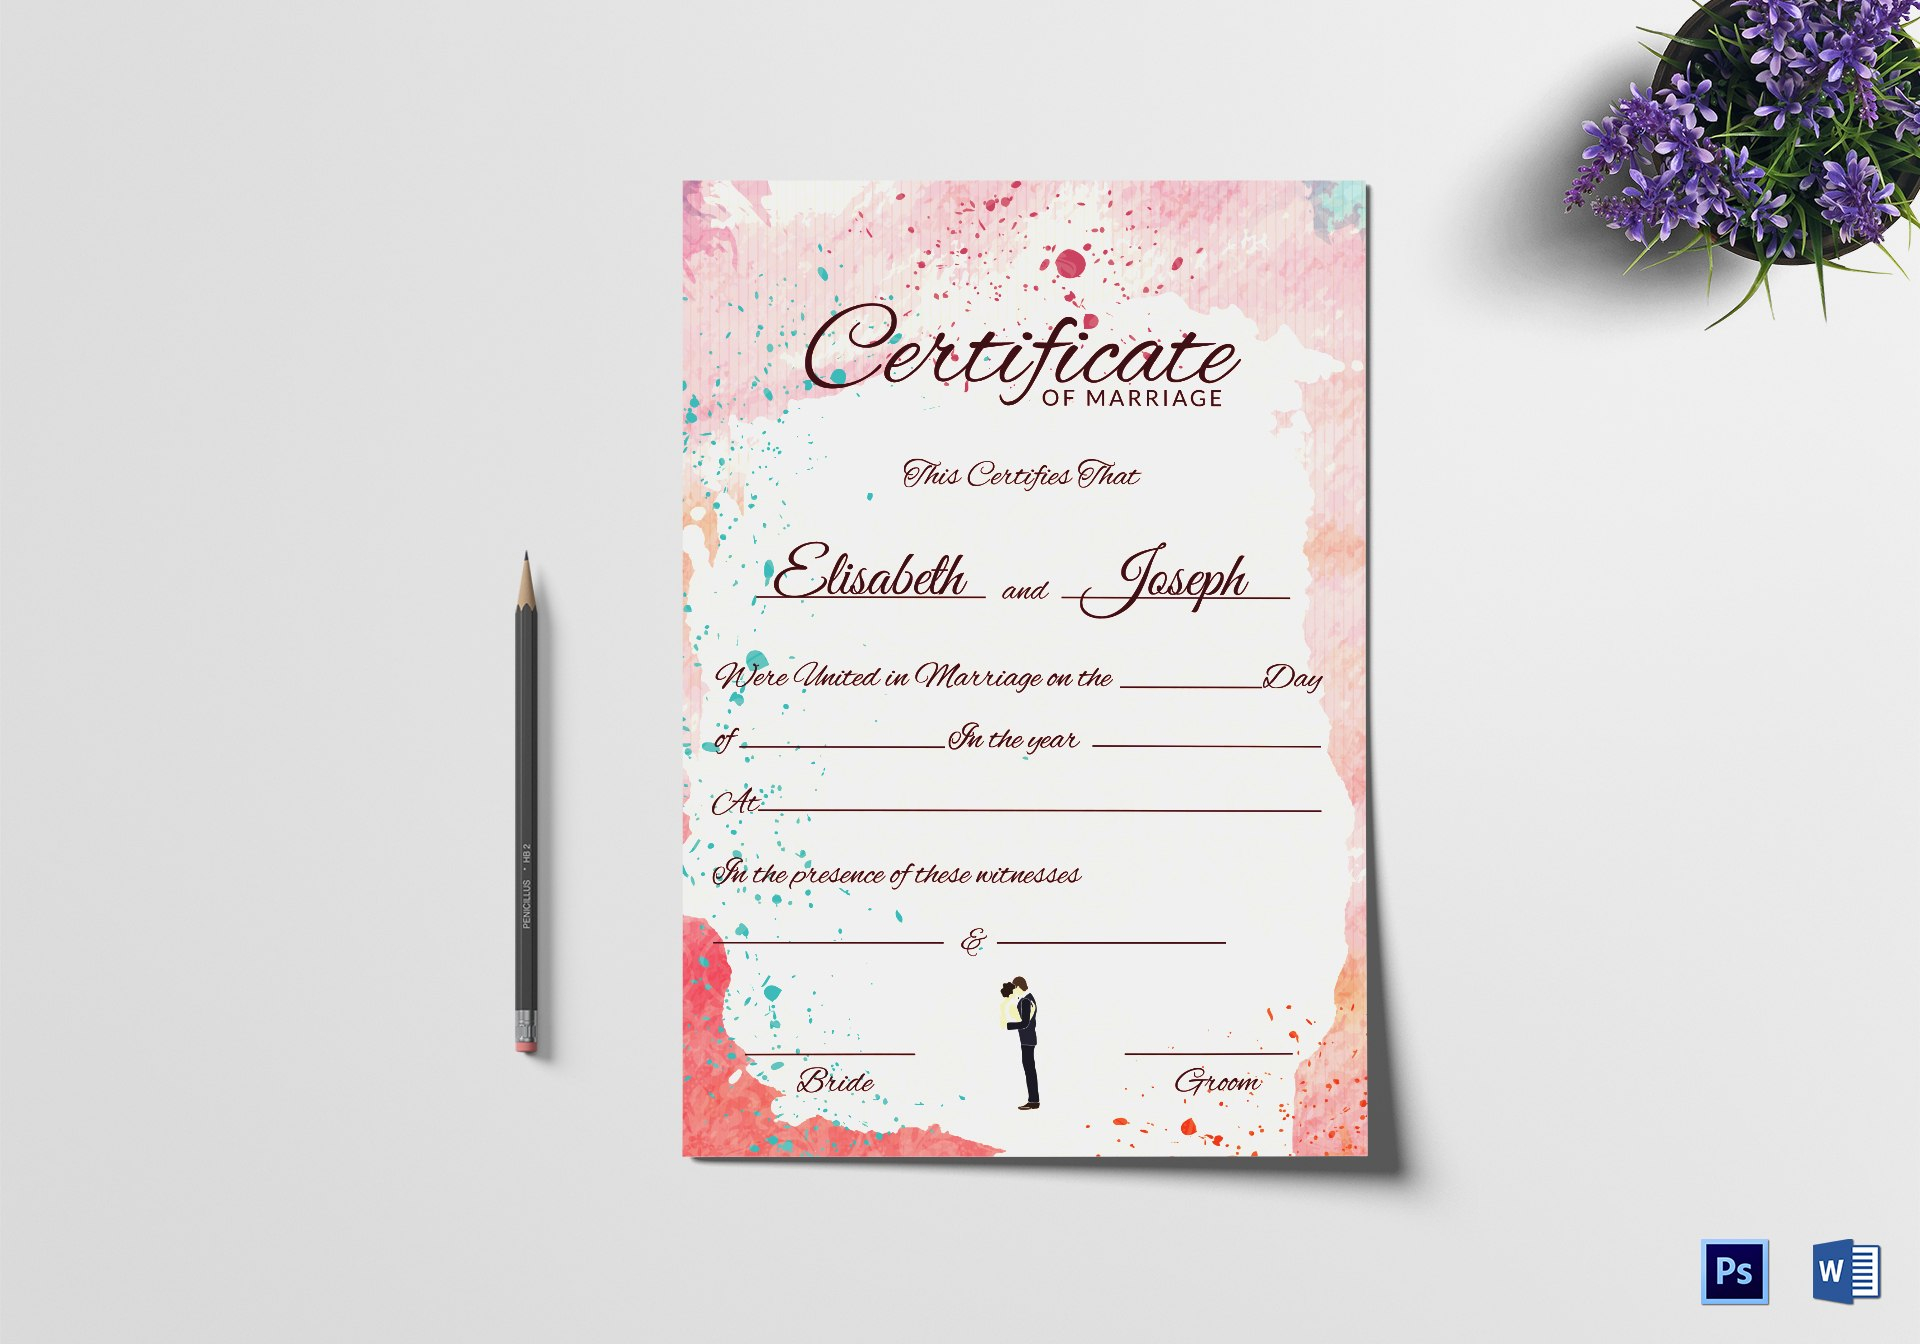 Christian Marriage Certificate Design Template In Psd Word pertaining to Christian Certificate Template